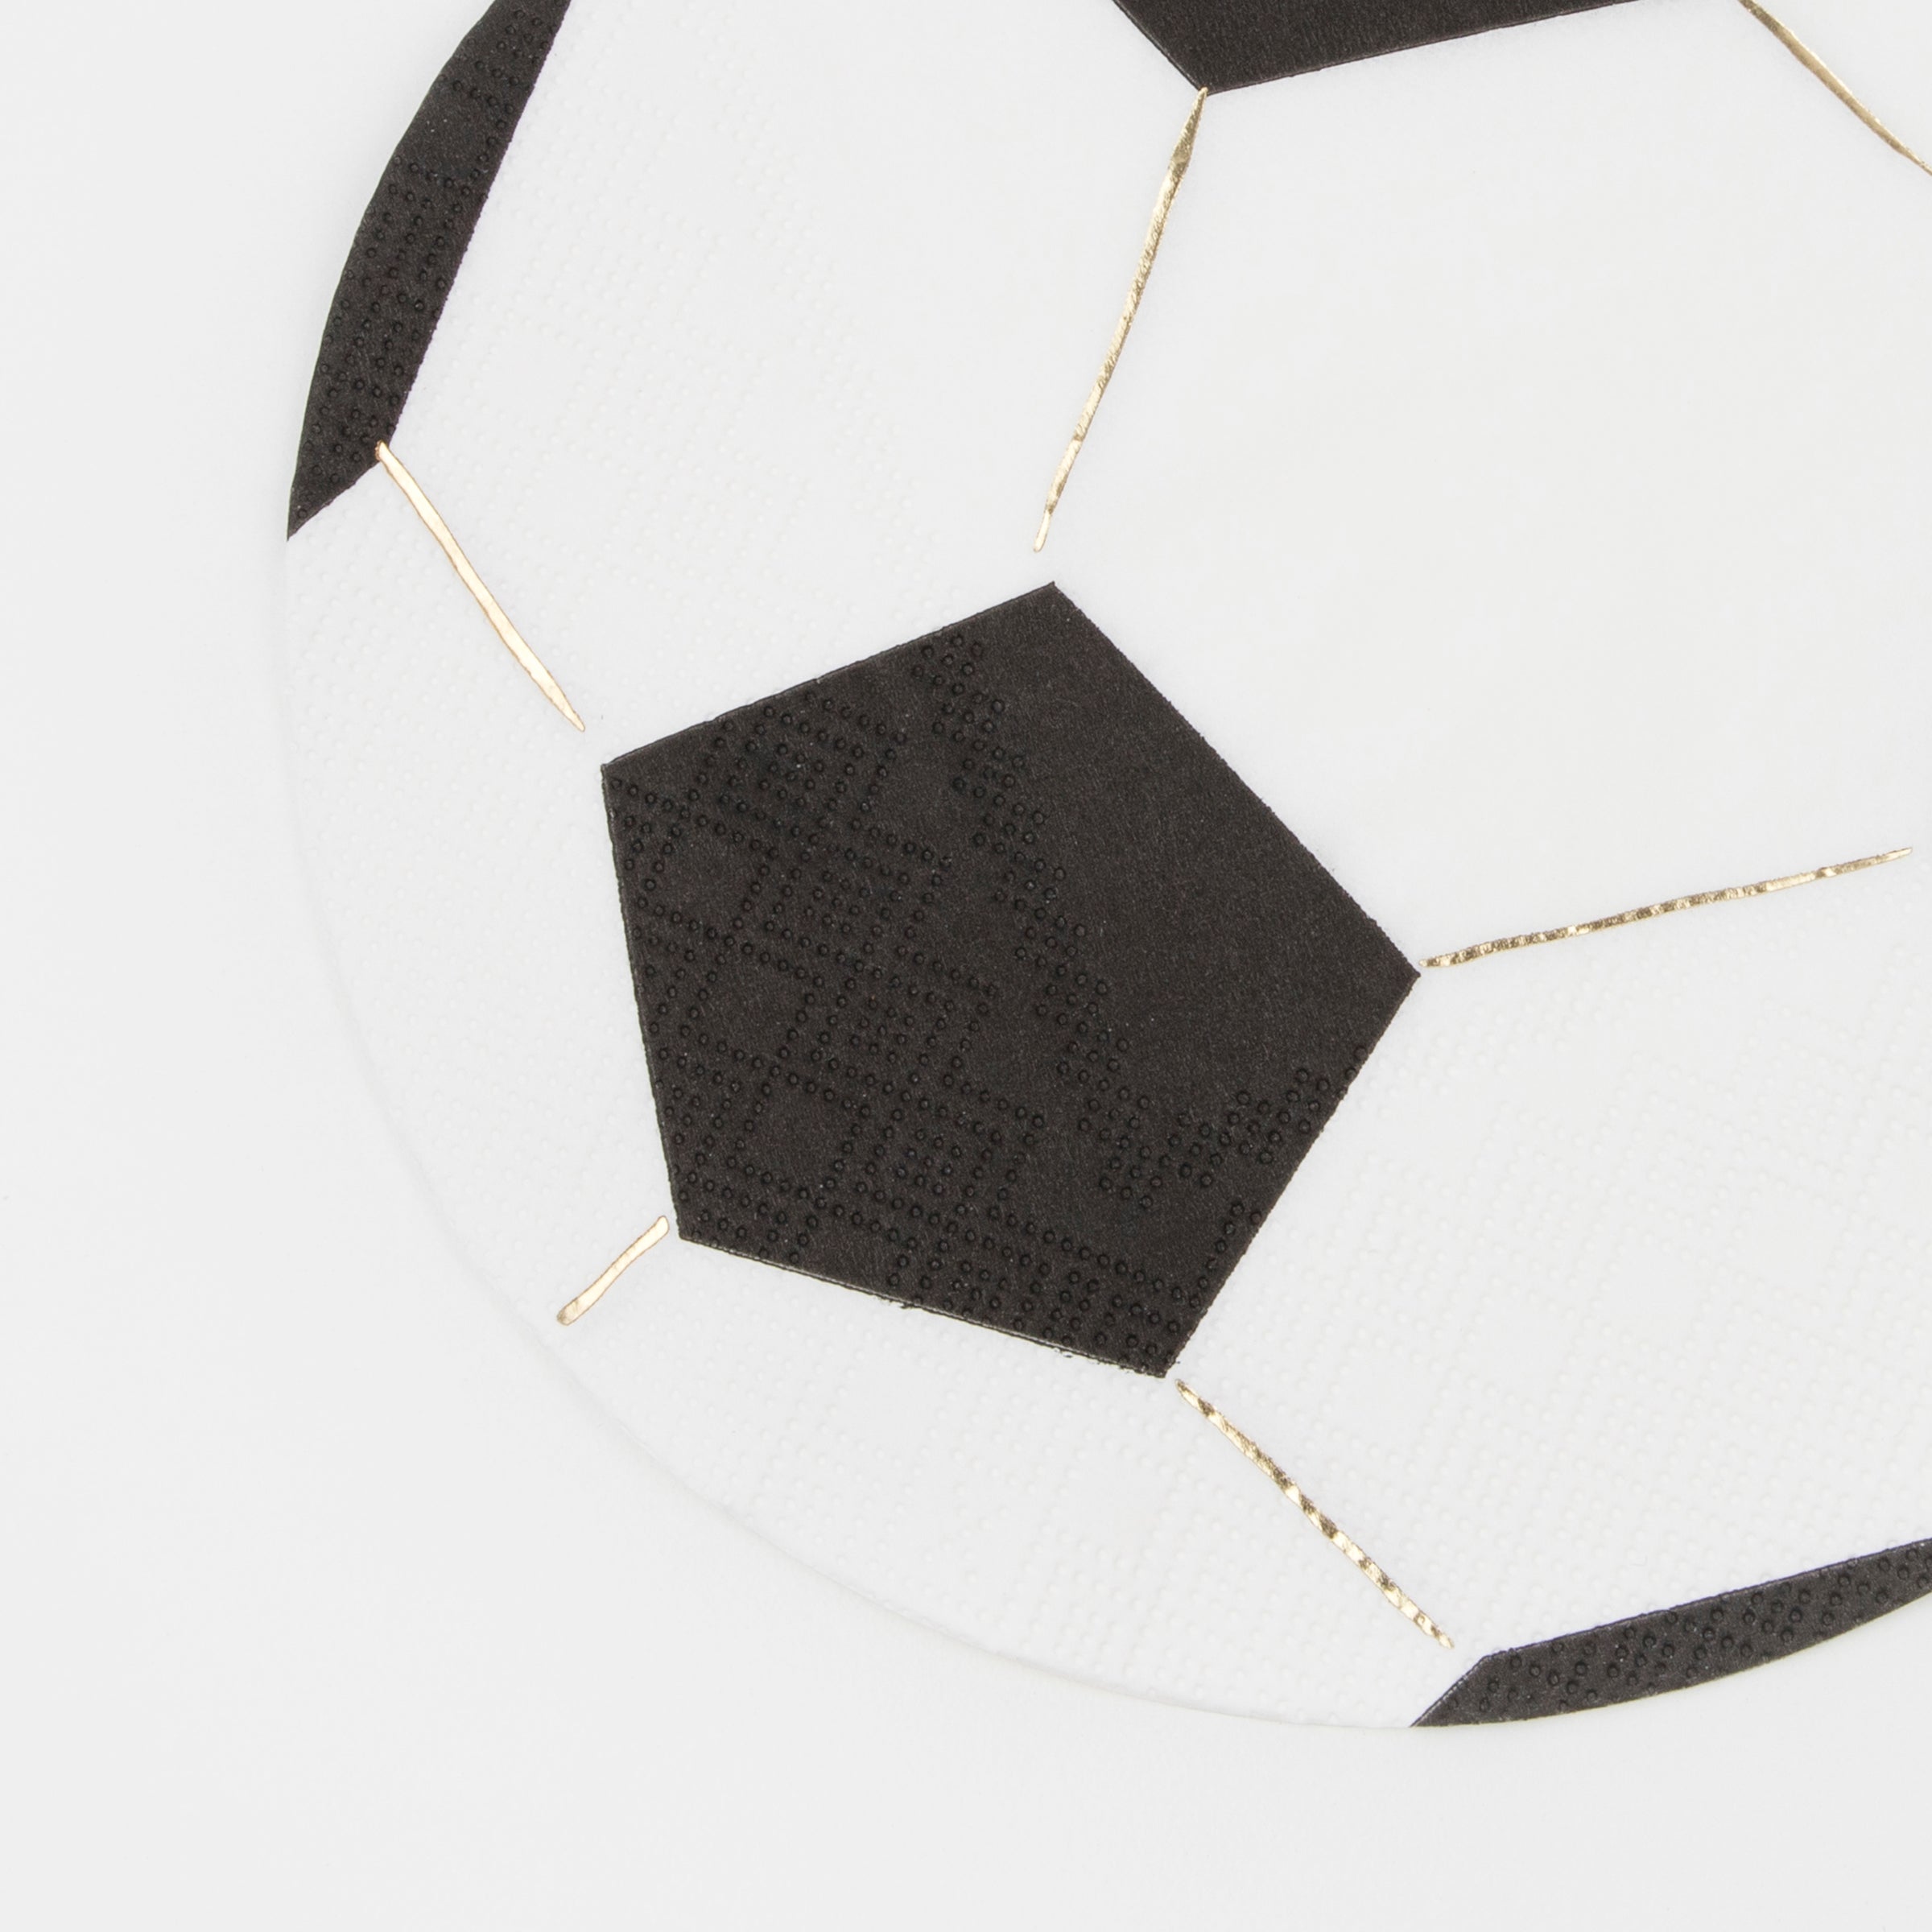 Our paper napkins are cut into the shape of a soccer ball with fabulous gold foil details.